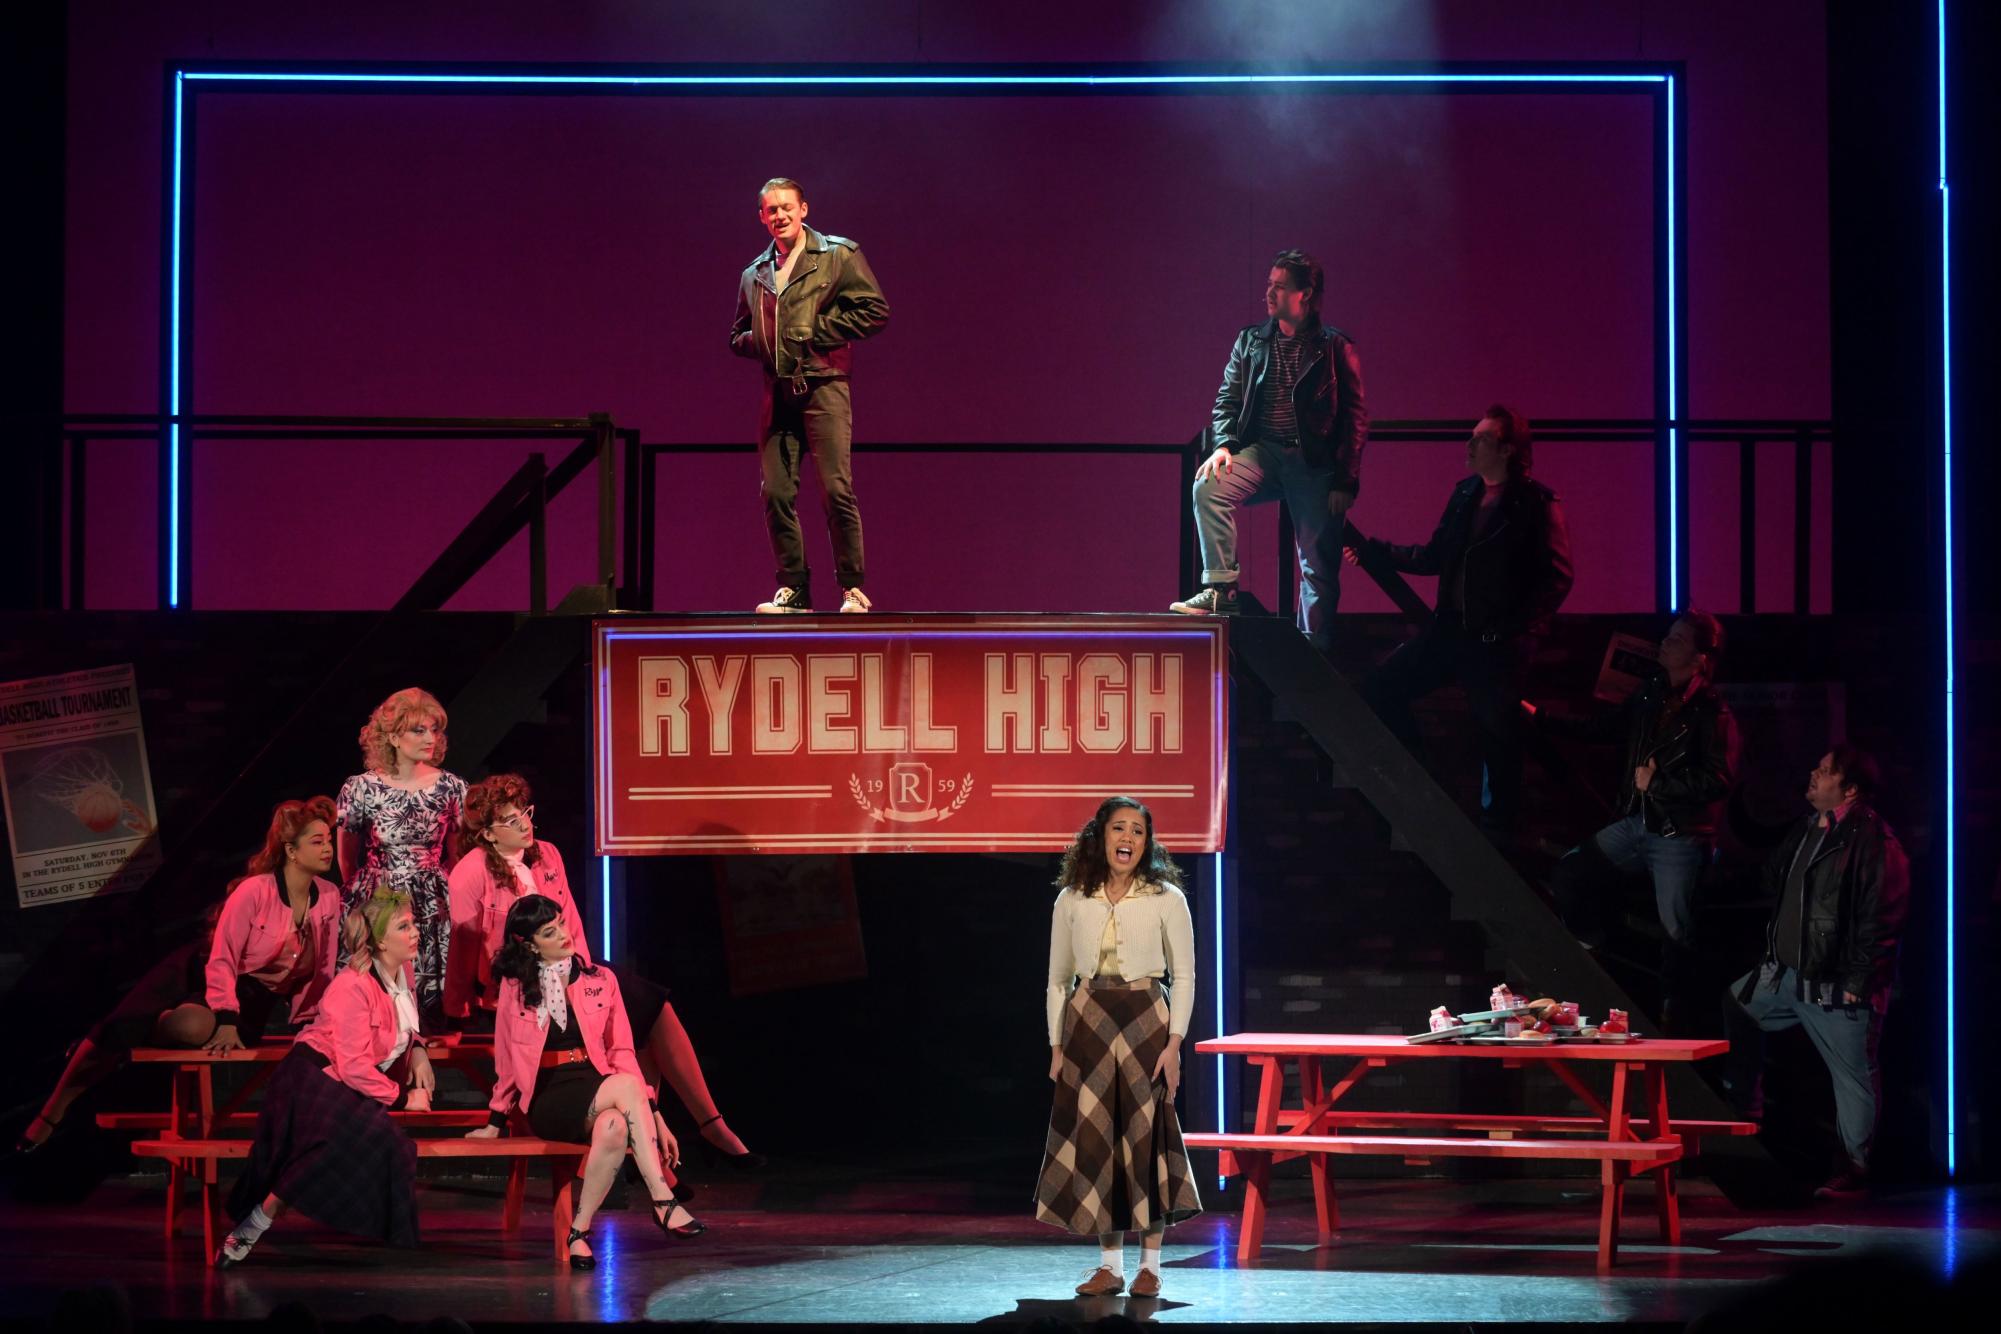 Pittsburgh Musical Theater transports audiences to 1950s with ‘Grease’ – The Pitt News